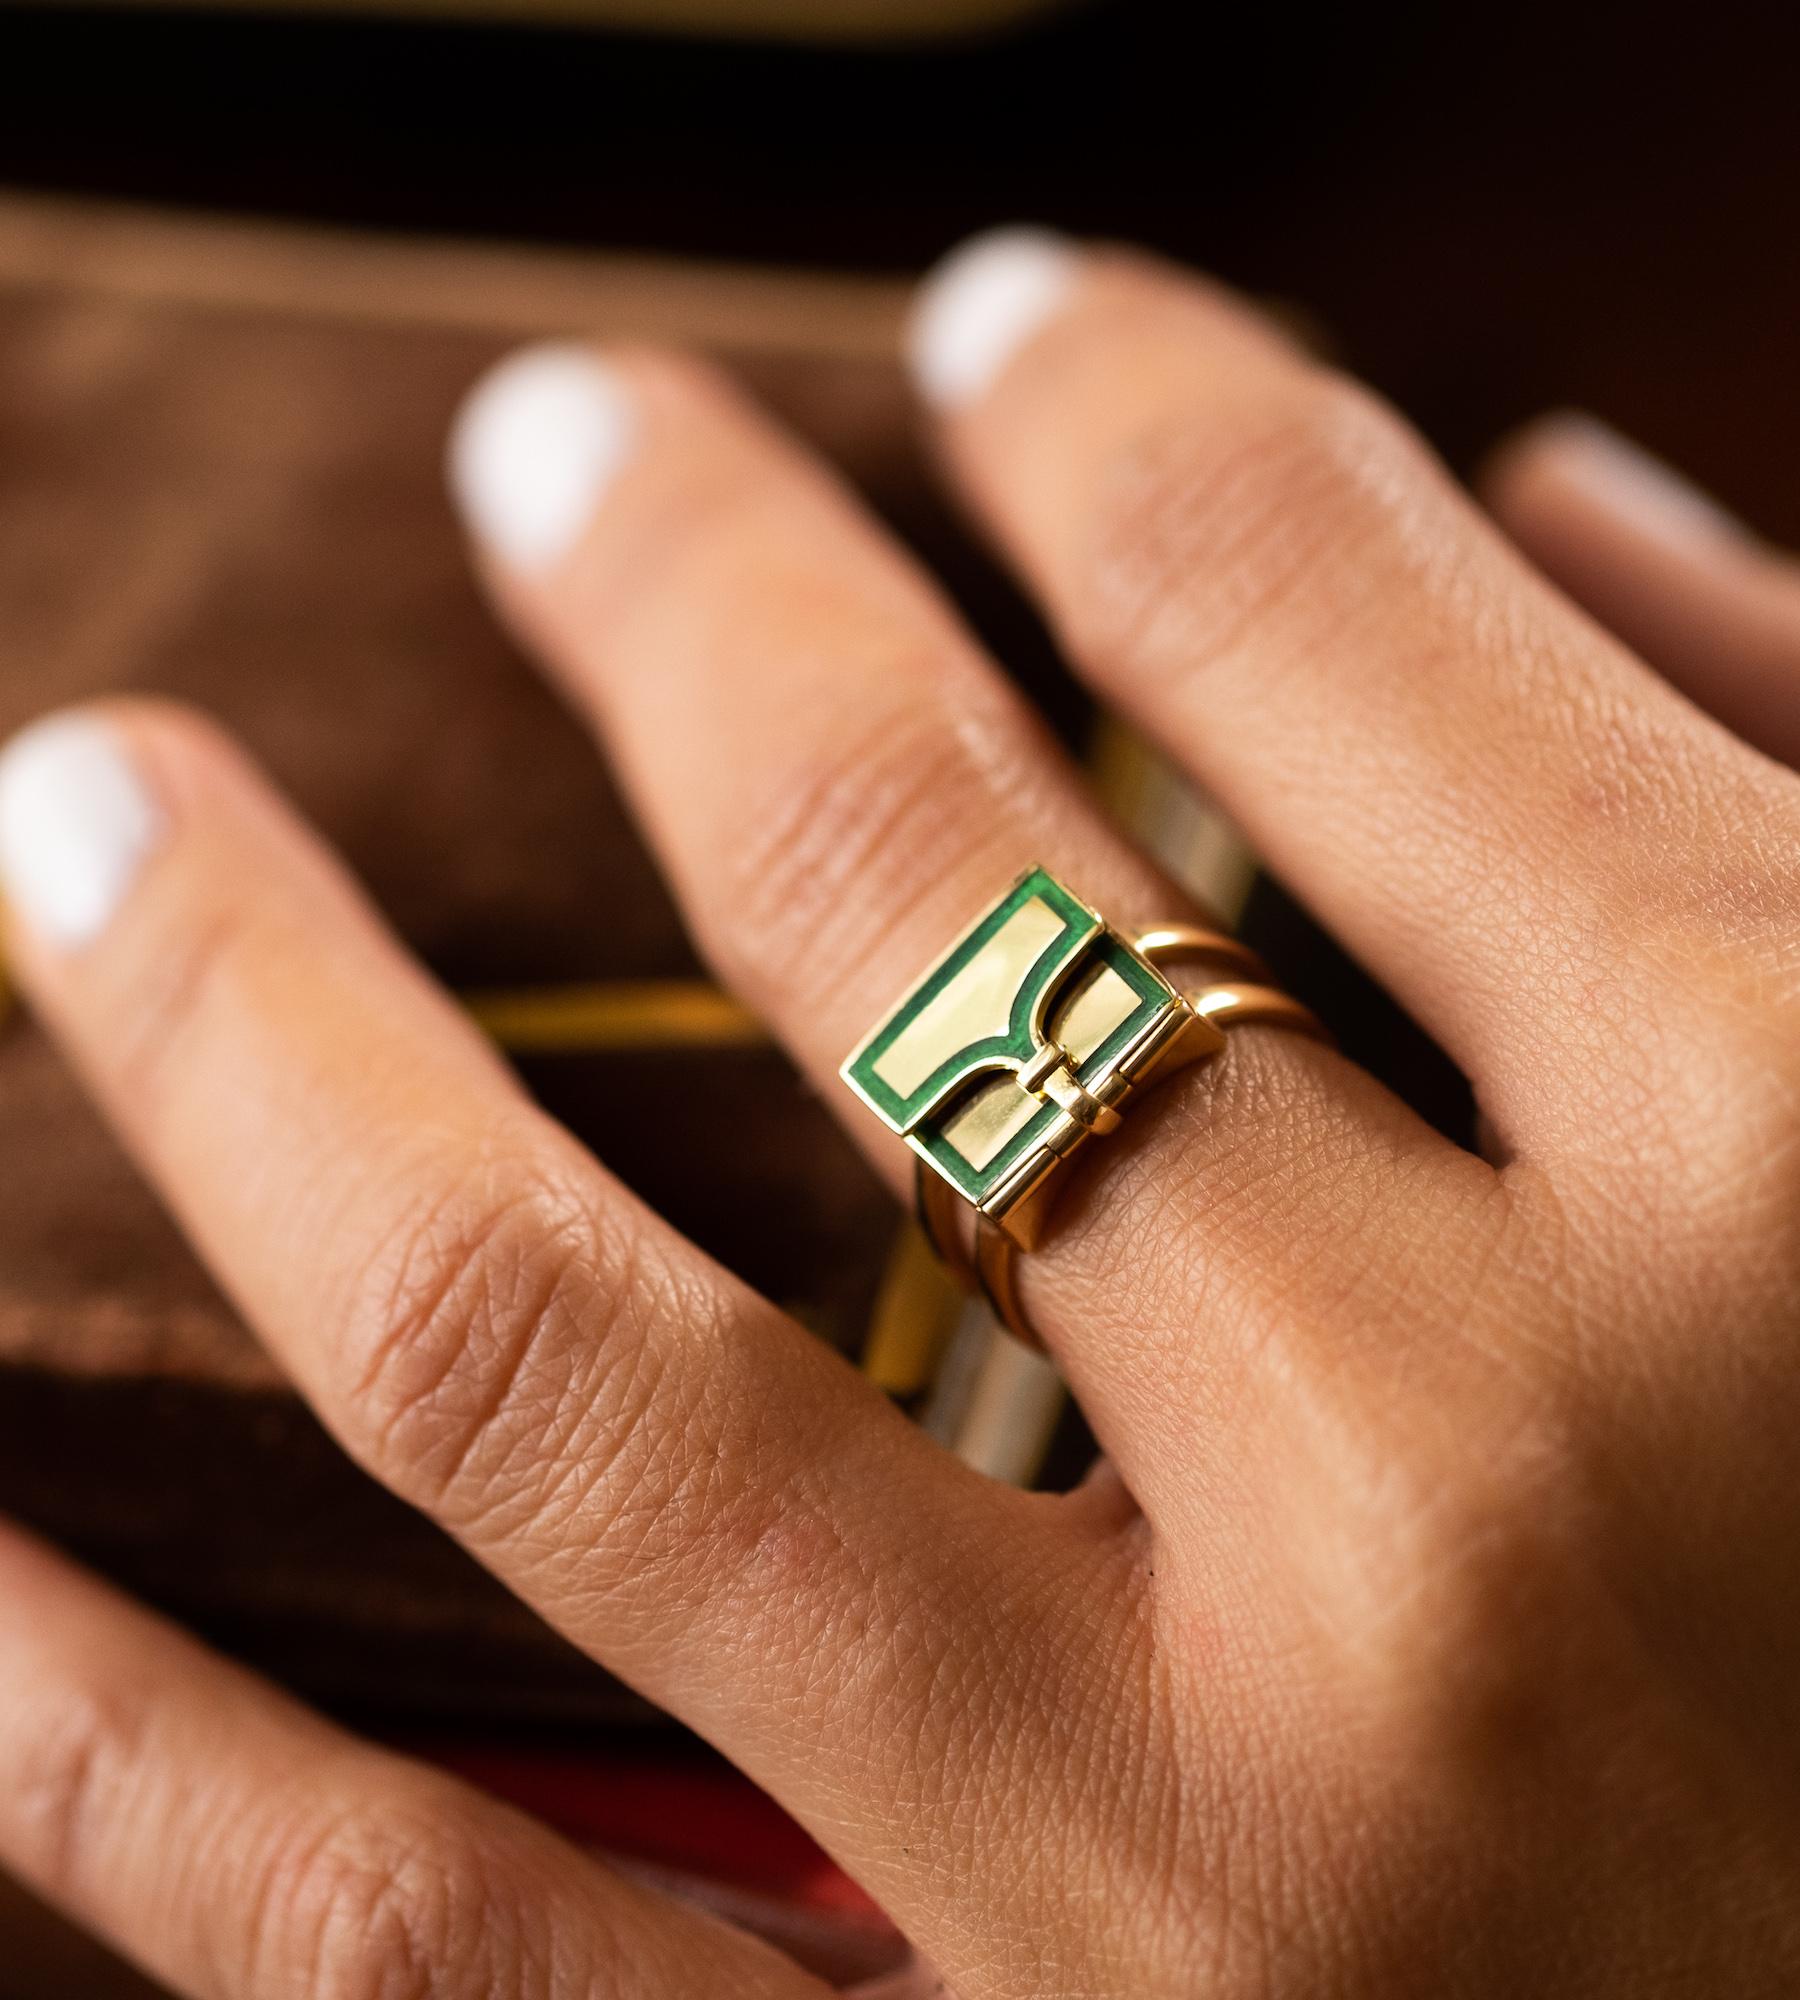 The Fleur Fairfax Book Ring in 18ct Gold and Enamel - Serpentine Green US 6.75 For Sale 1